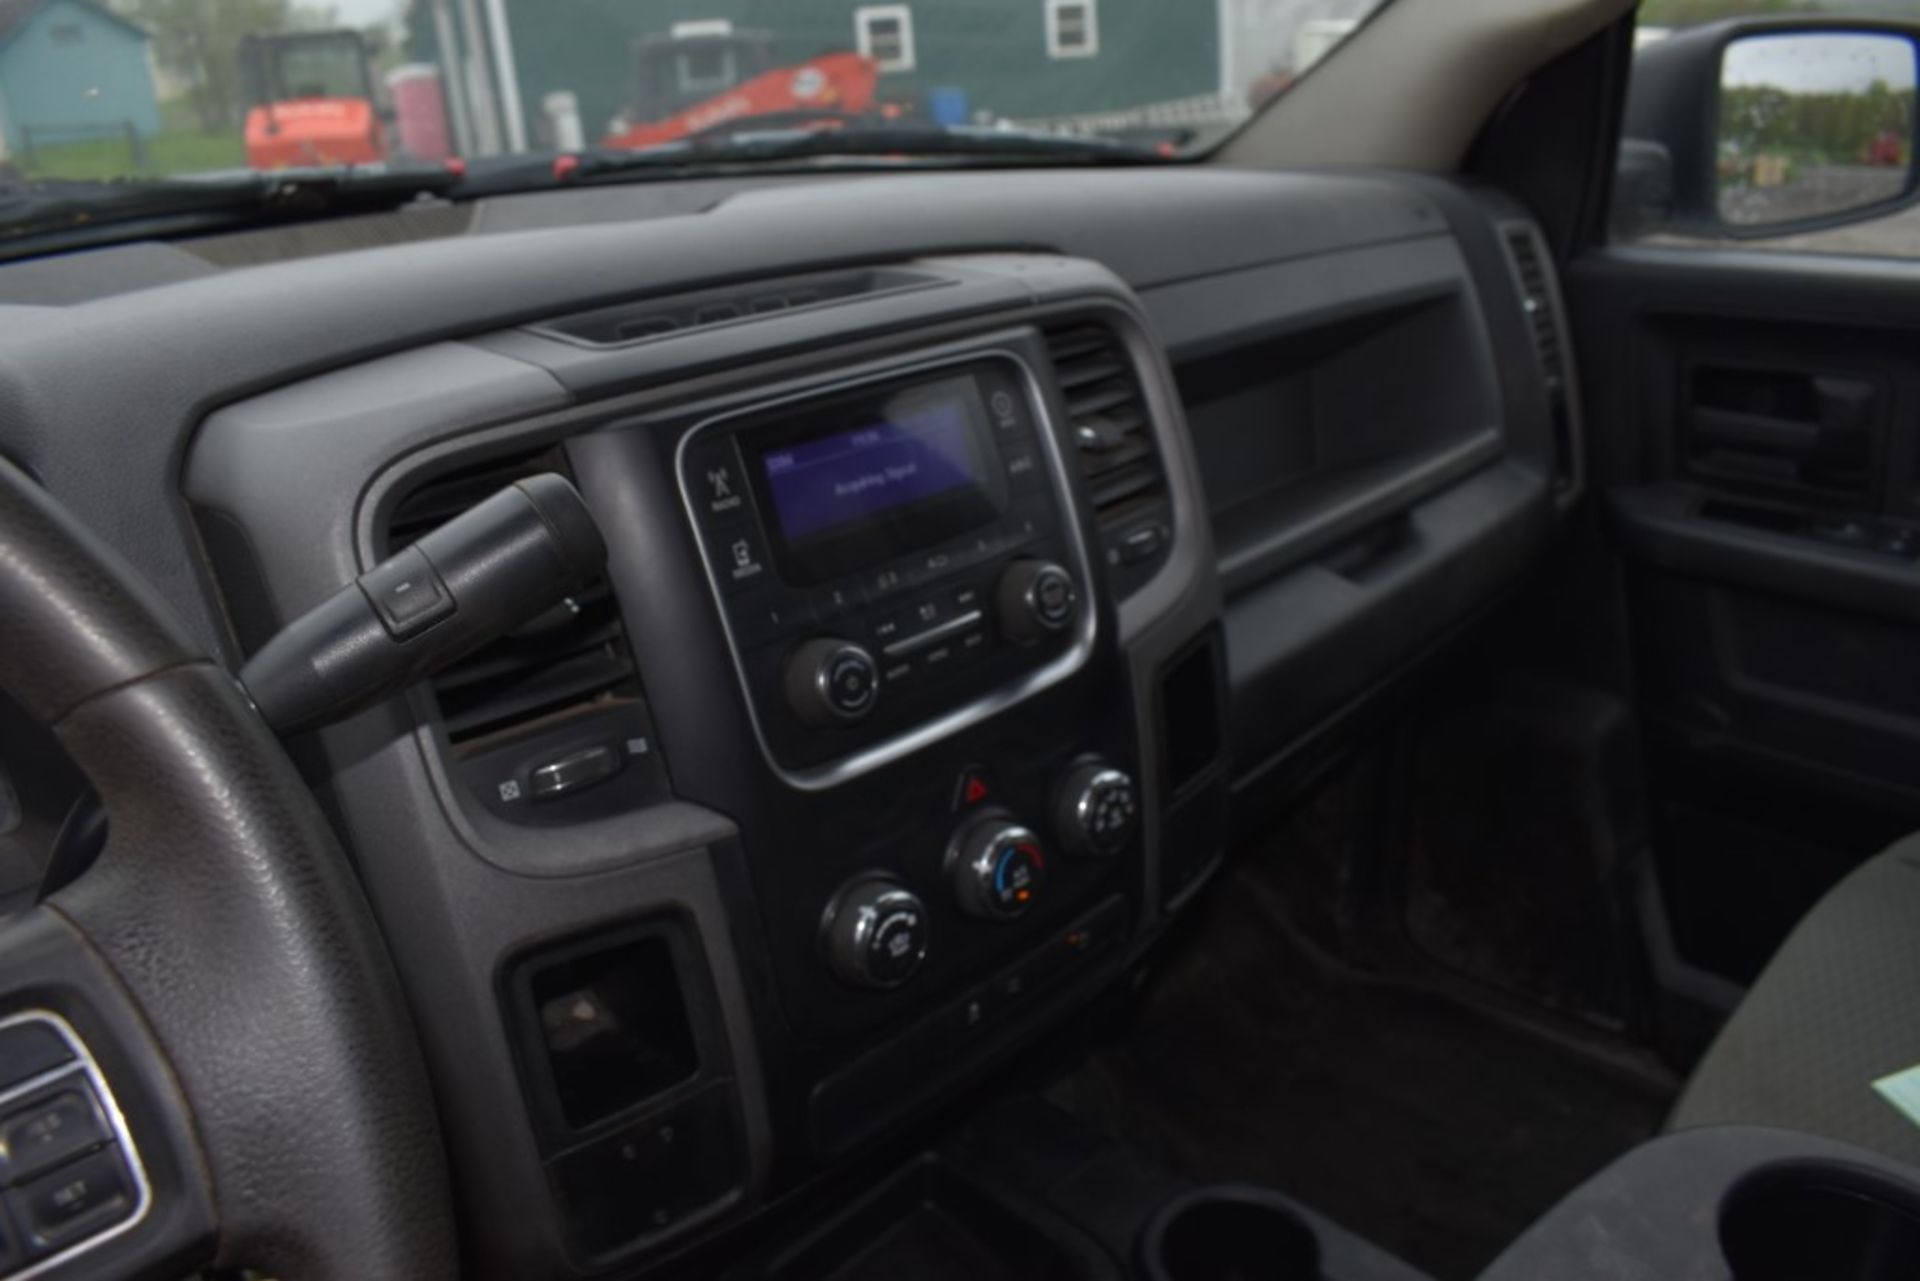 2015 Dodge Ram 2500 Truck With Title, 181238 Miles, Runs and Drives, Hemi 5.7 Gas Engine, Automatic, - Image 22 of 23